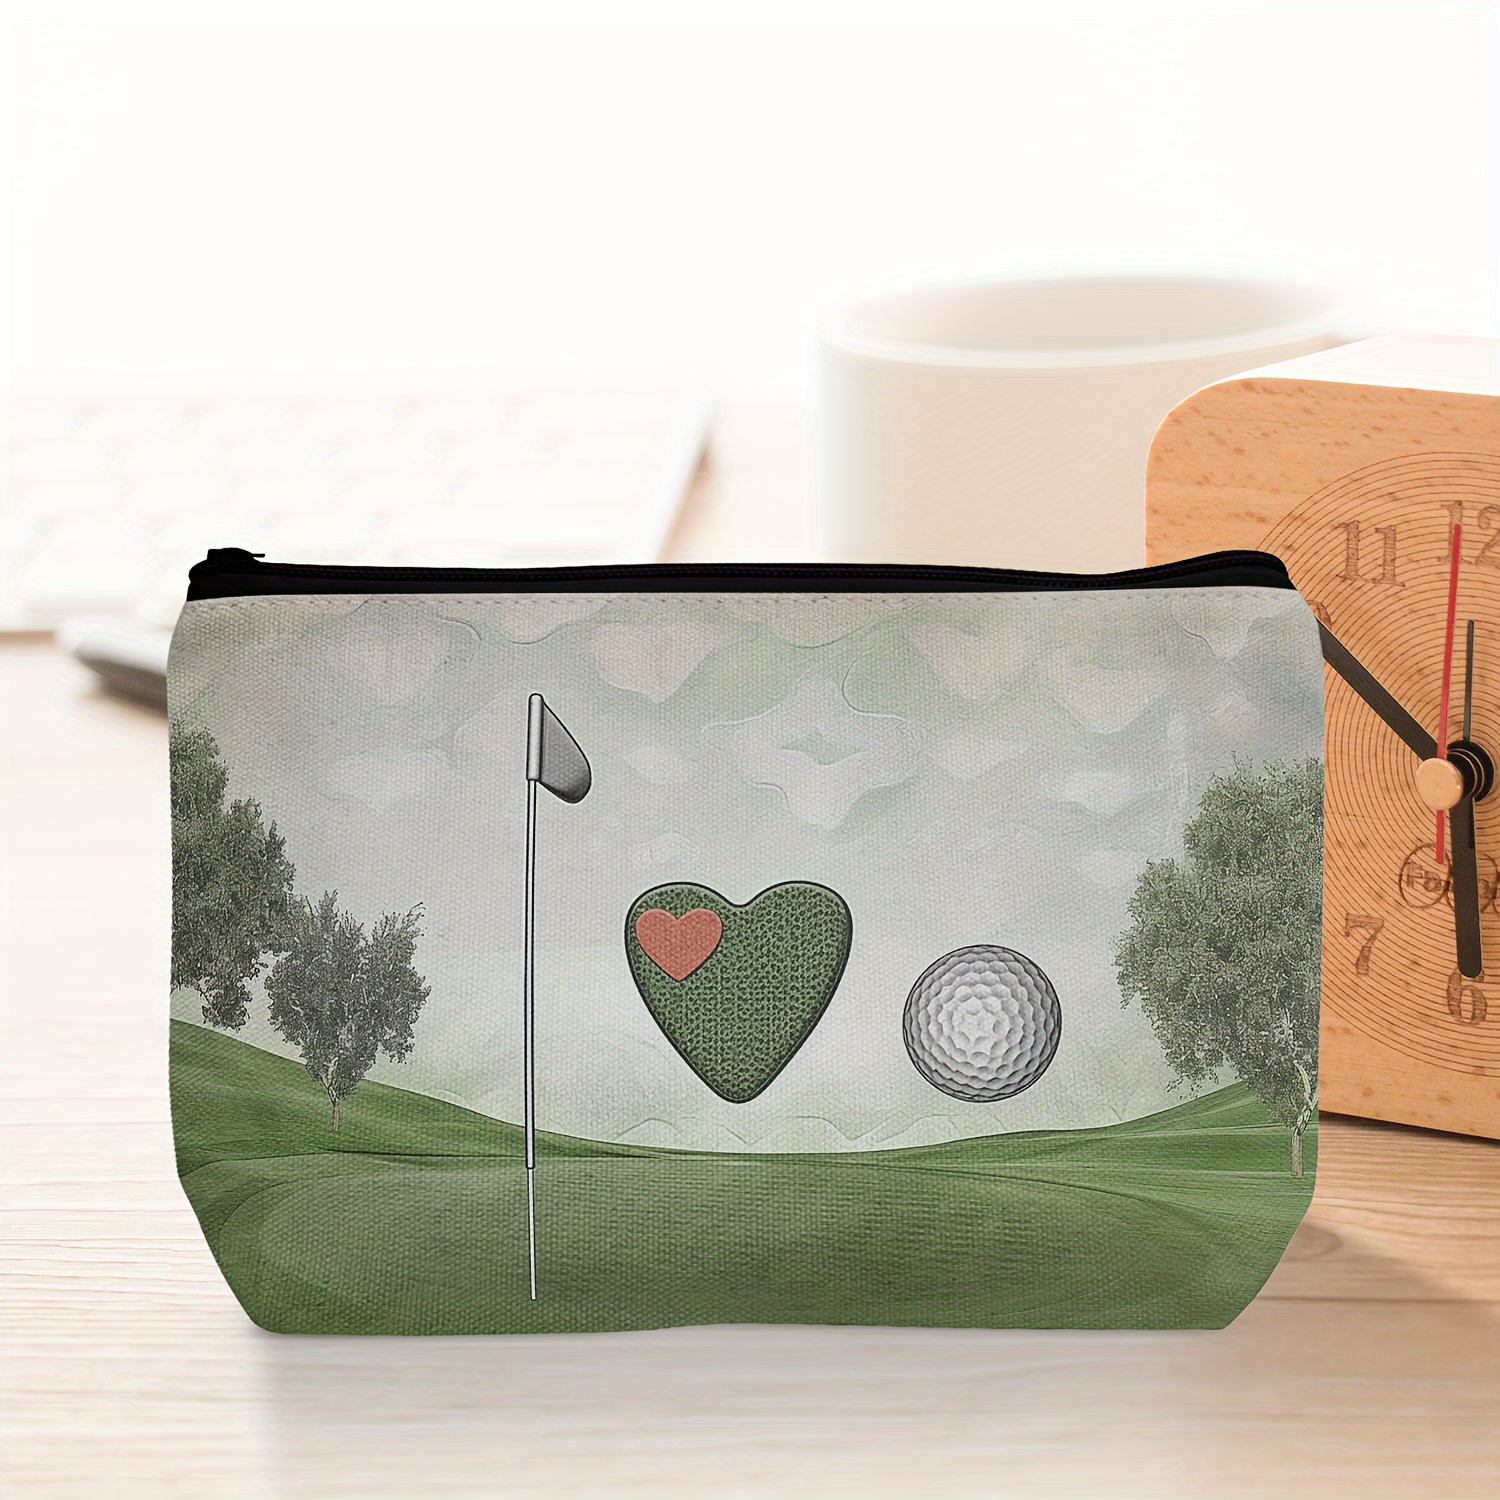 

1pc Cosmetic Bag For Women, Dacron Cosmetic Bag, Aesthetic Design Ladies Toiletry Bag, Women's Pencil Case, Golf Lawn Make Up Organizer With Zipper